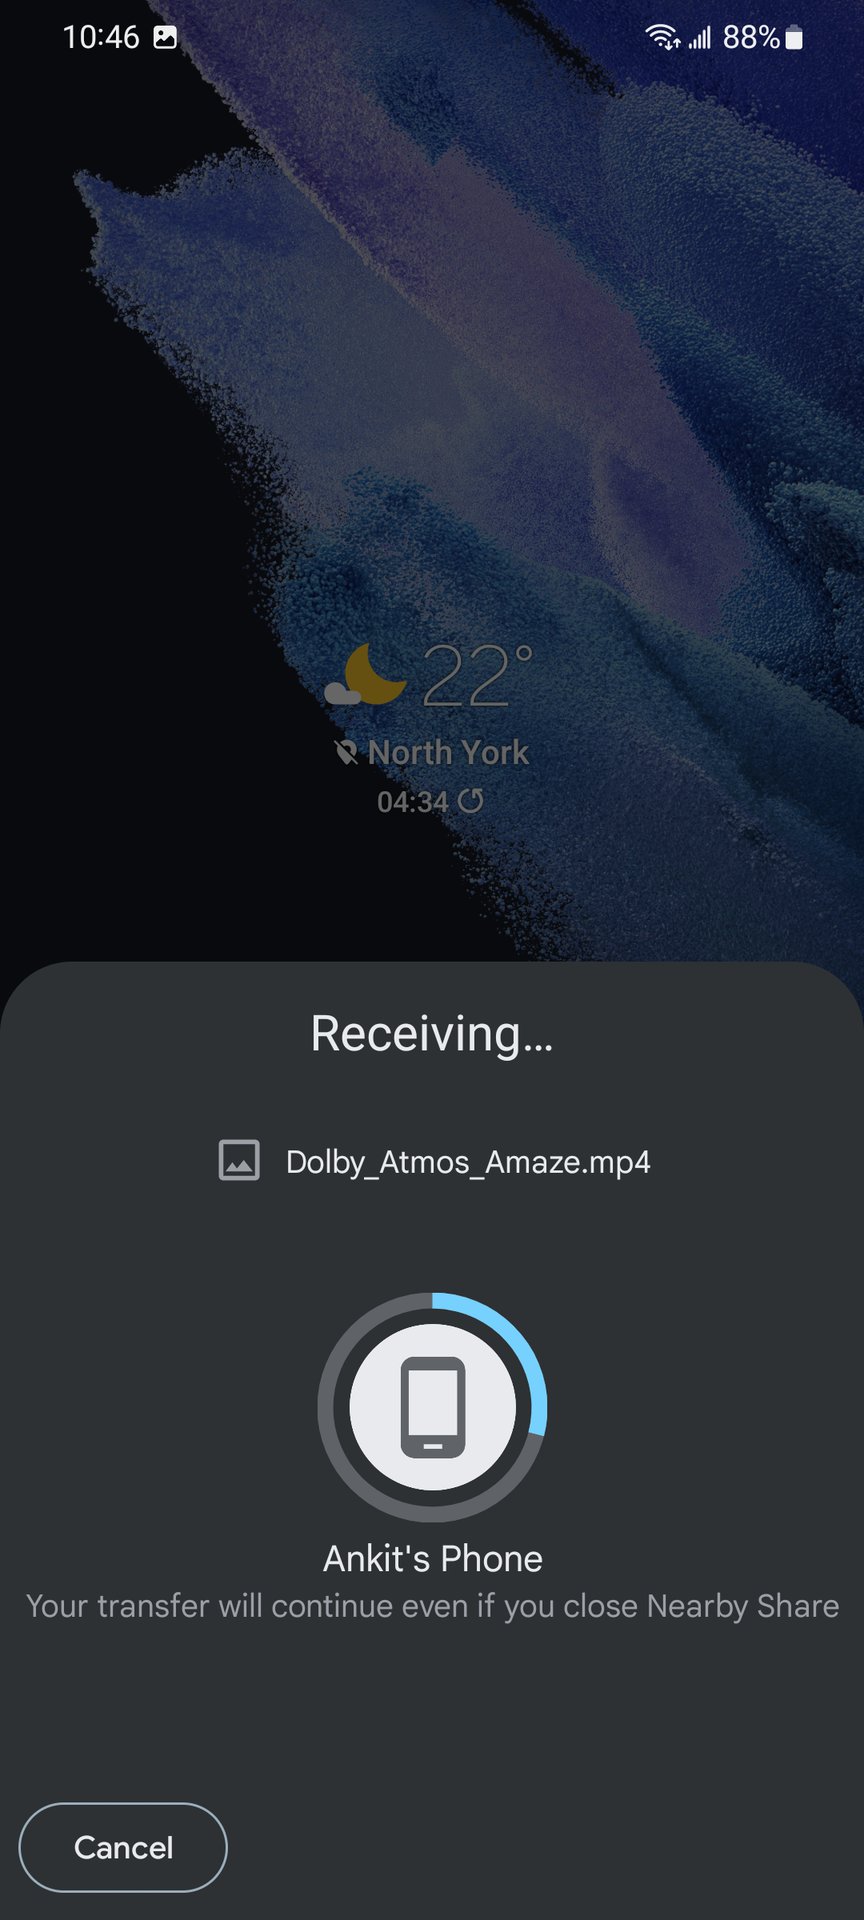 nearby share accept request and file transfer on second device